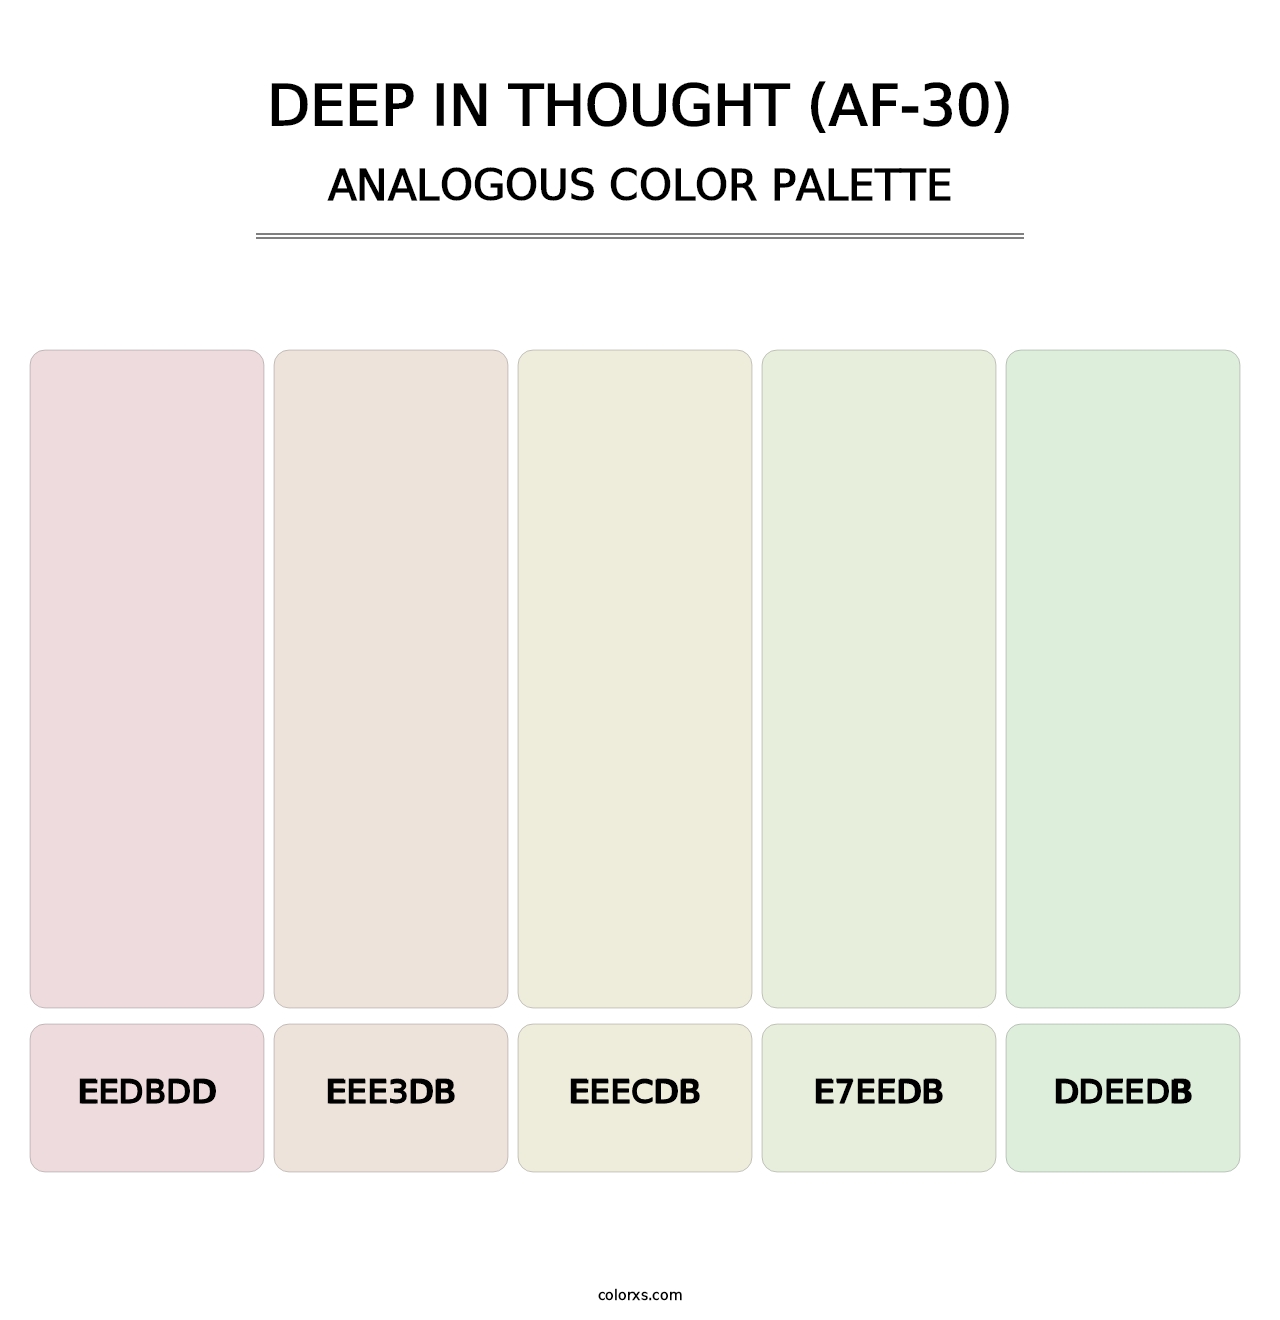 Deep in Thought (AF-30) - Analogous Color Palette